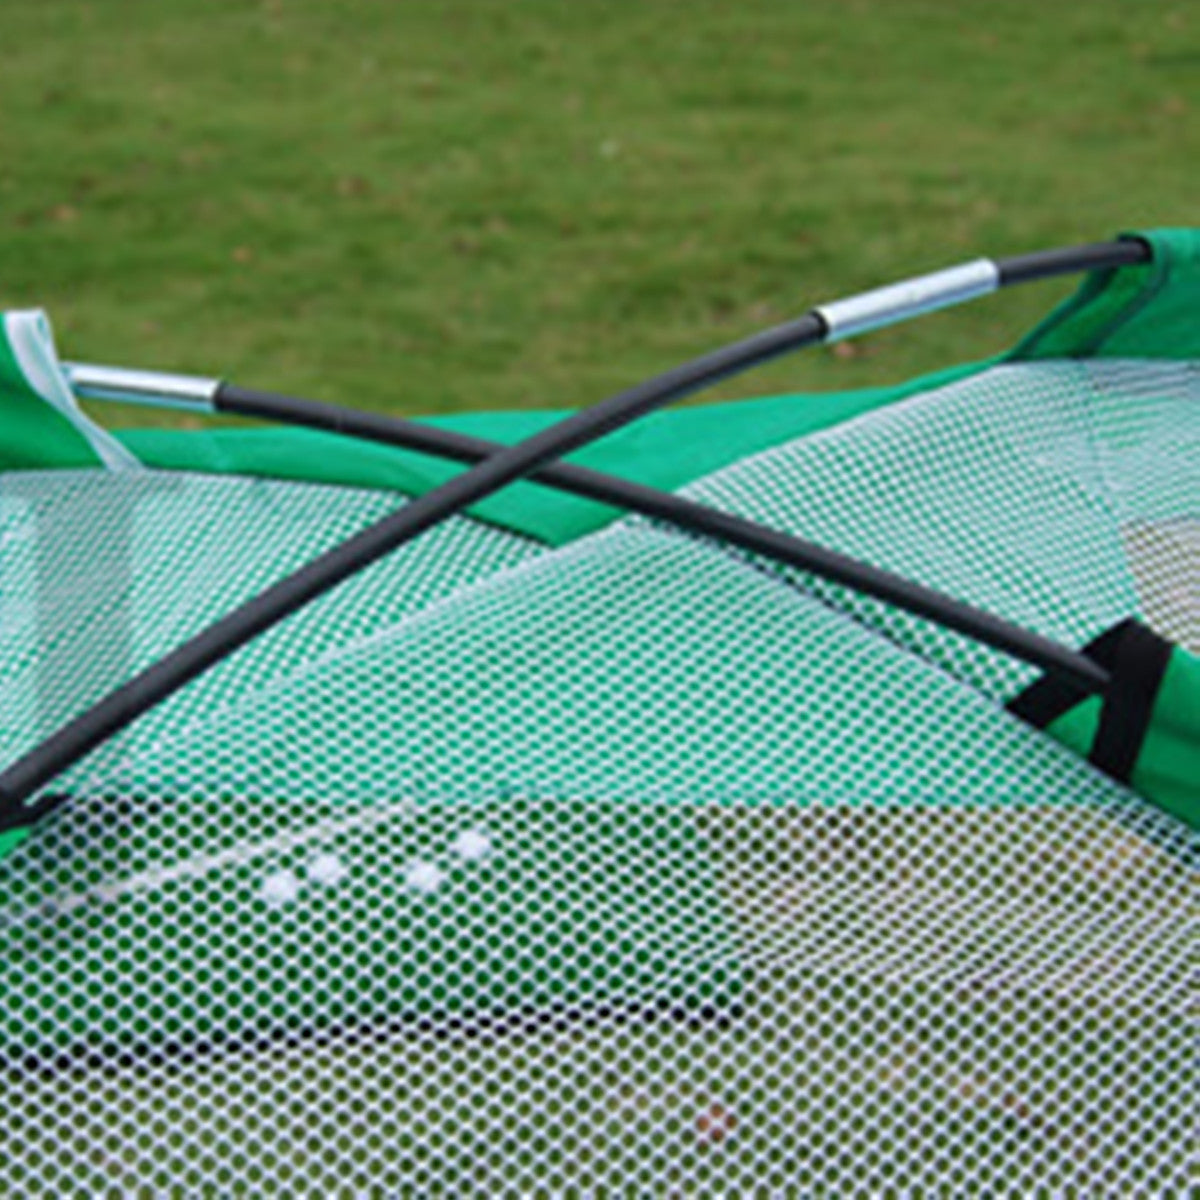 GolfBasic Foldable Golf Practice GREEN Cage Net